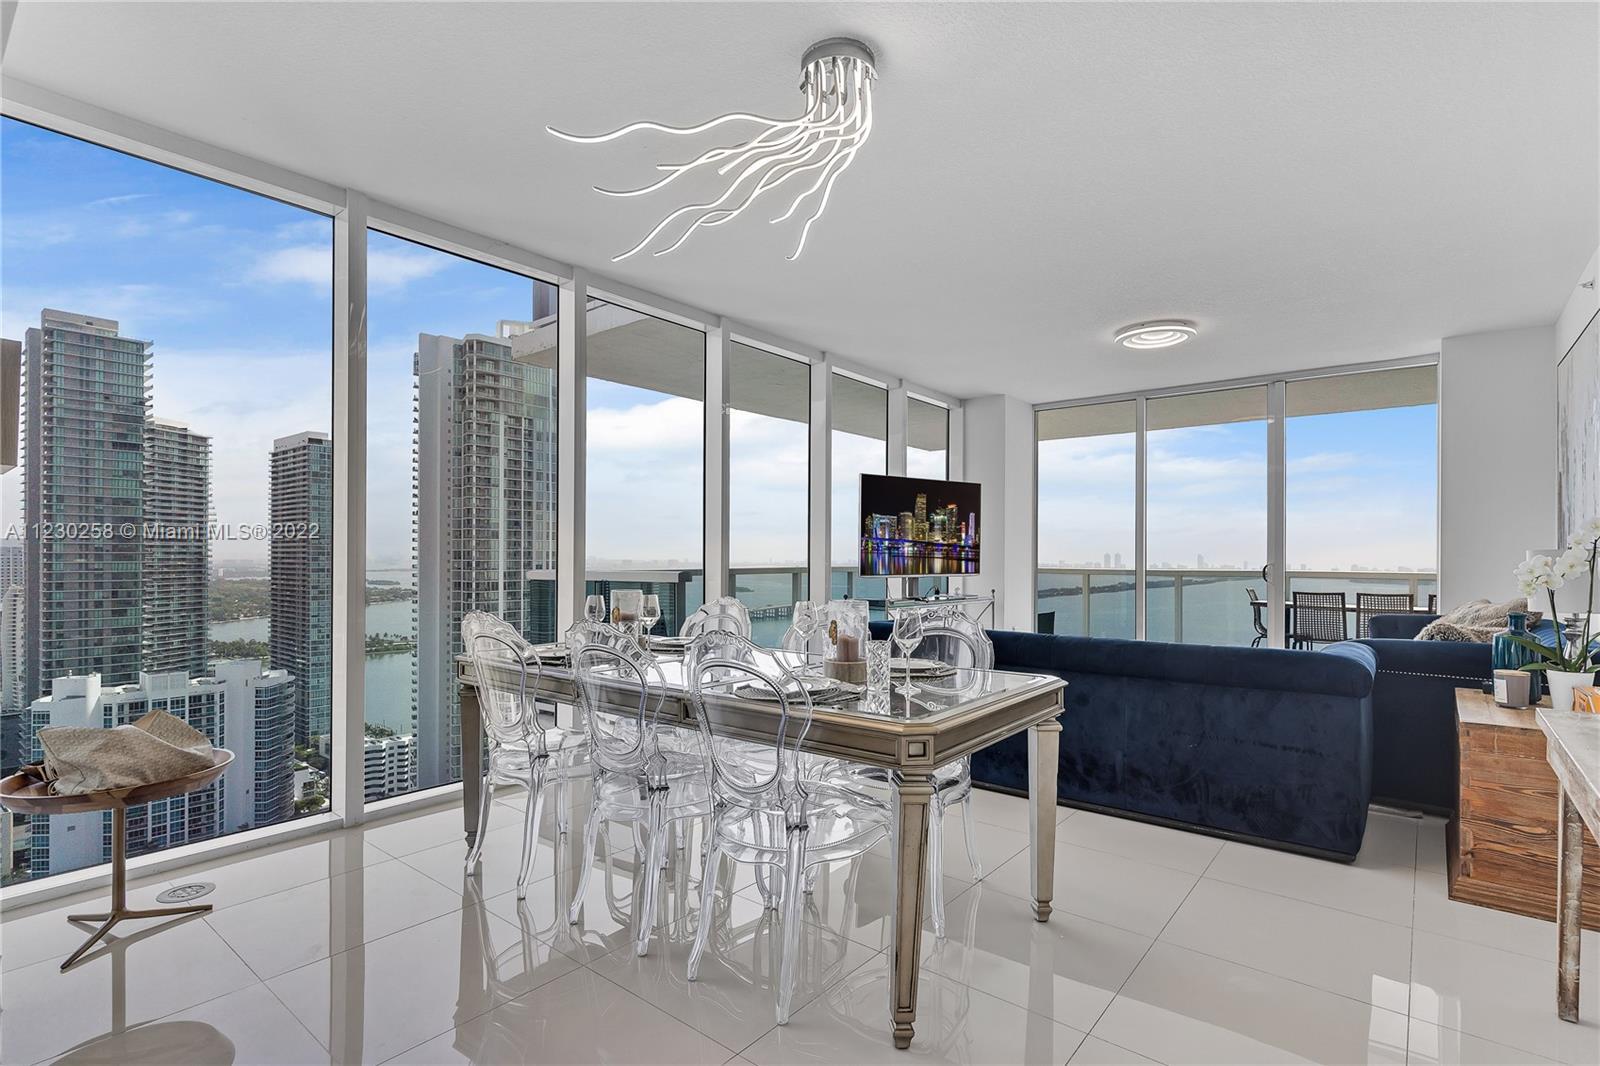 Live in style at this modern custom residence at Bay House in Edgewater. This corner unit has breath